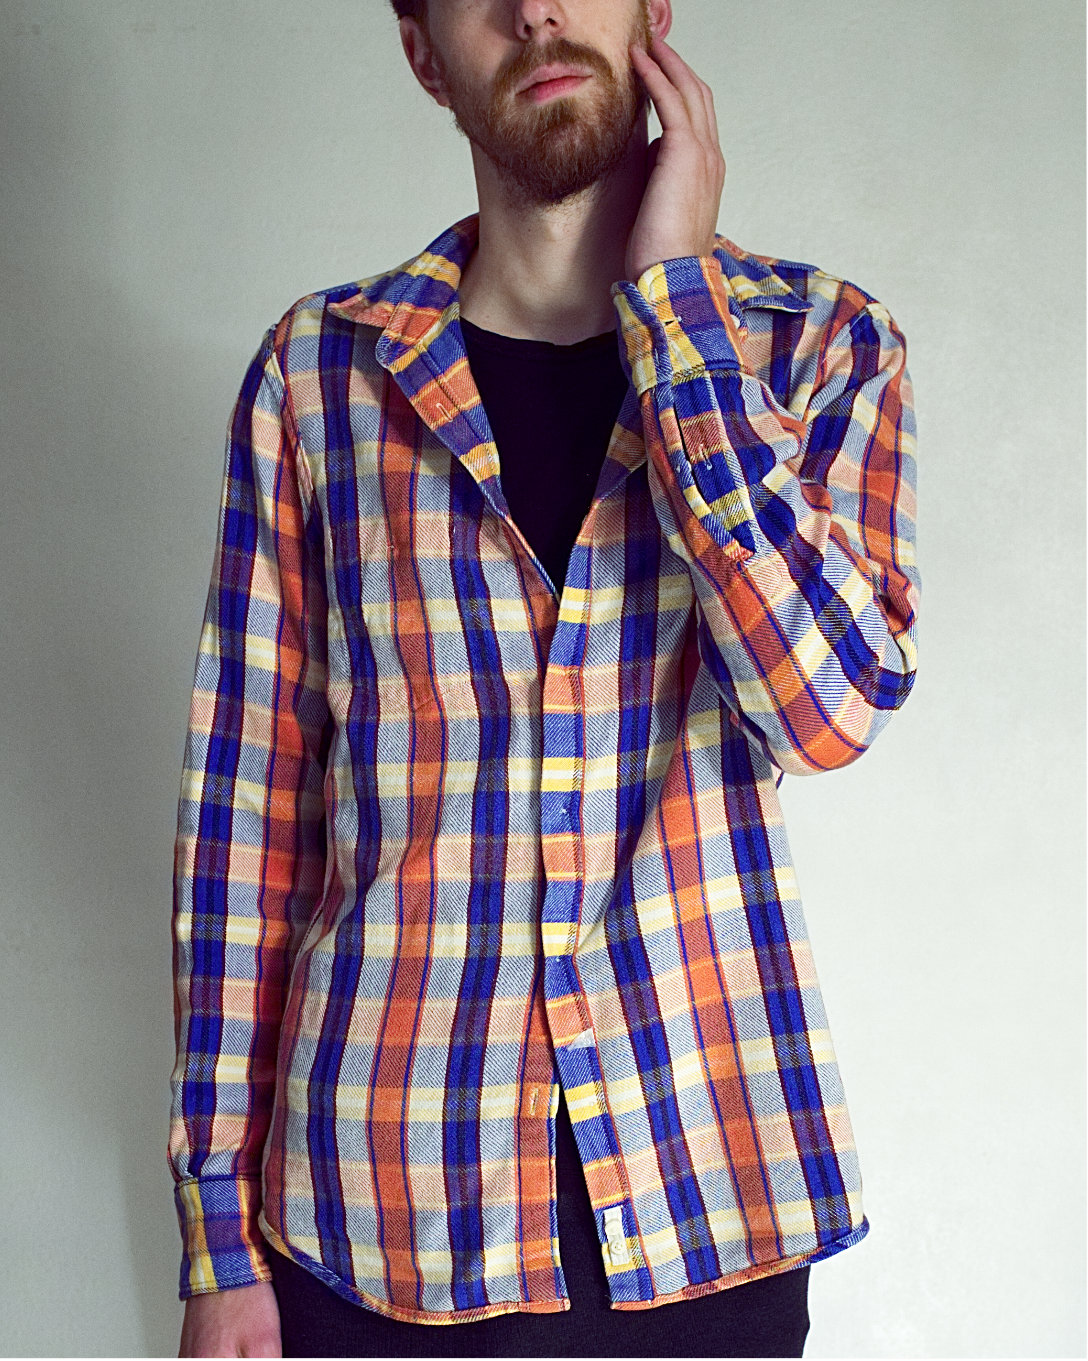 Model wears a blue and orange plaid shirt, their eyes are outside the frame hidden